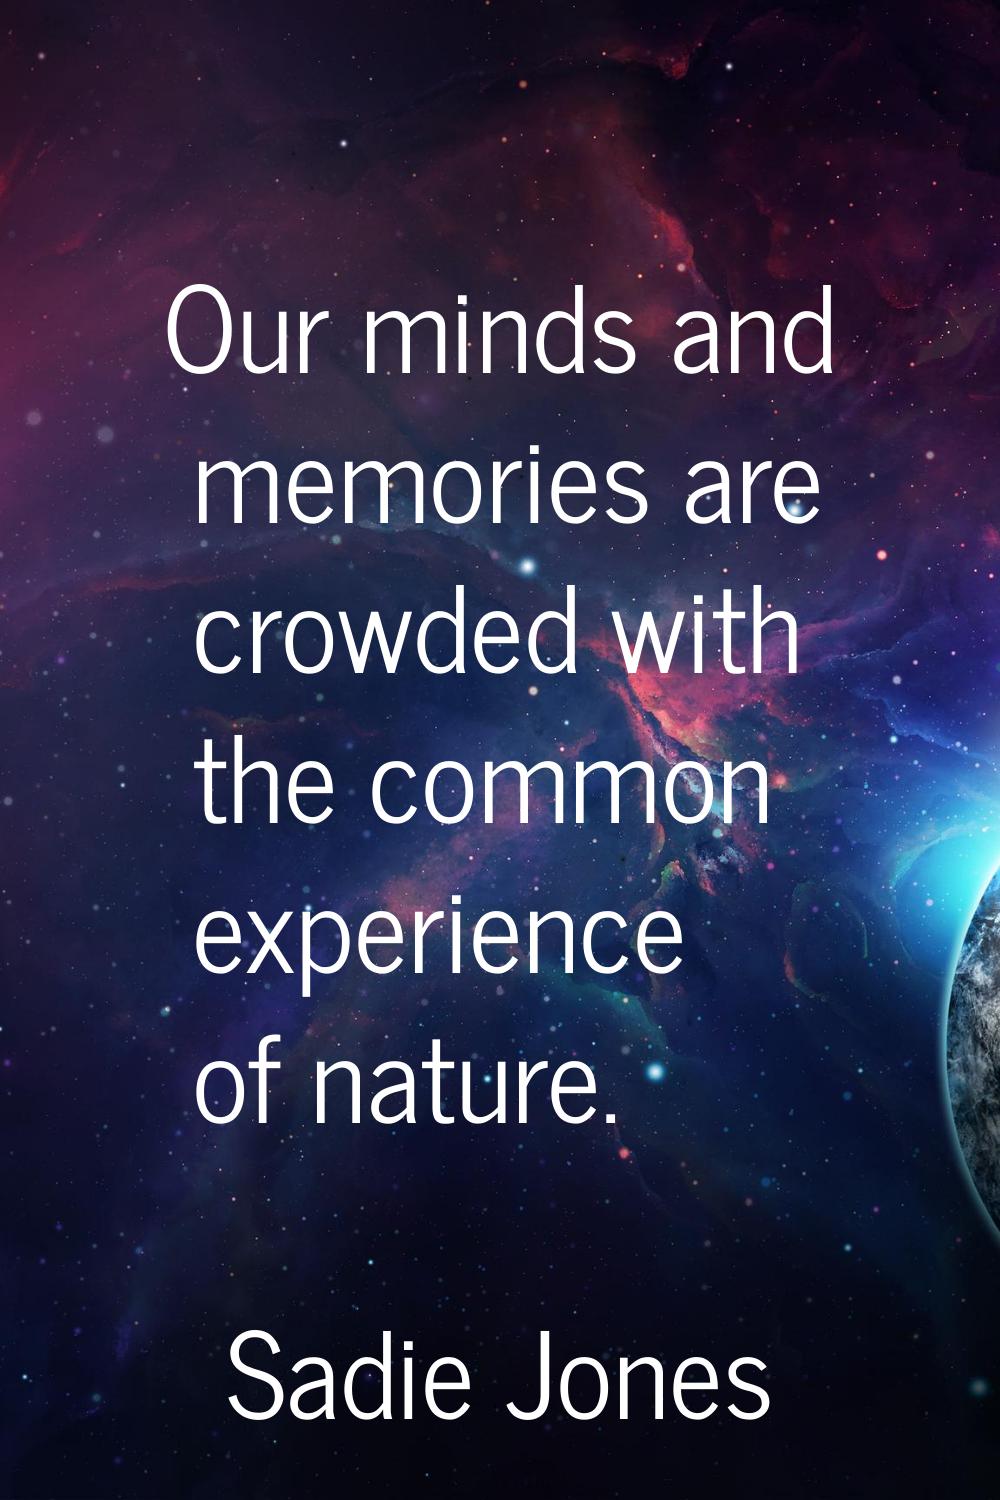 Our minds and memories are crowded with the common experience of nature.